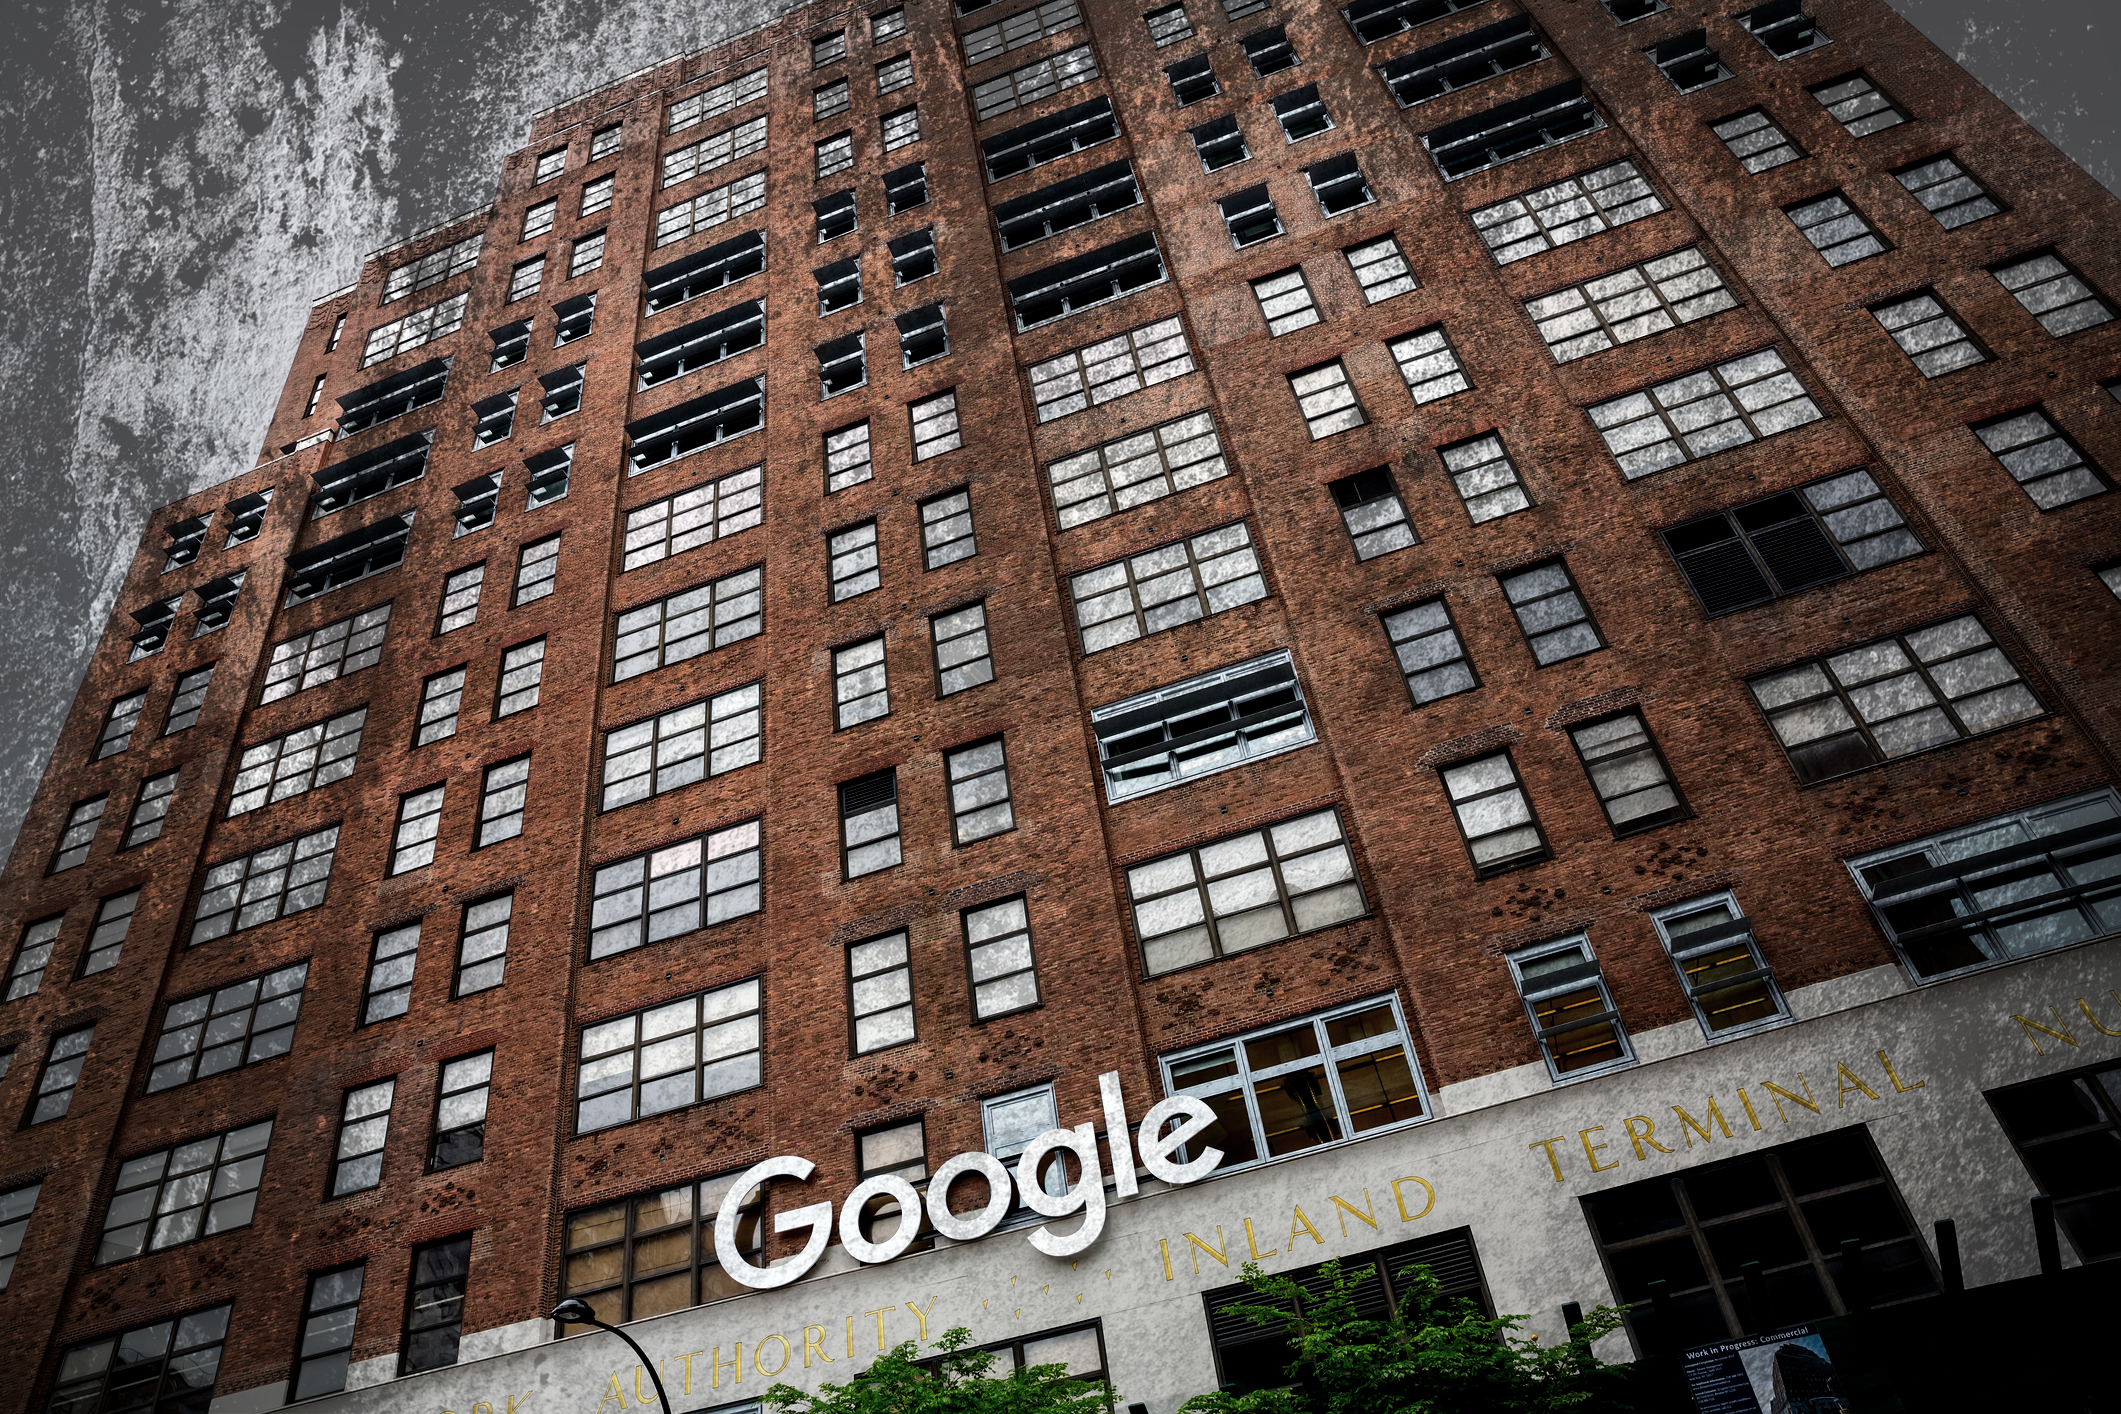 A Google building in New York.